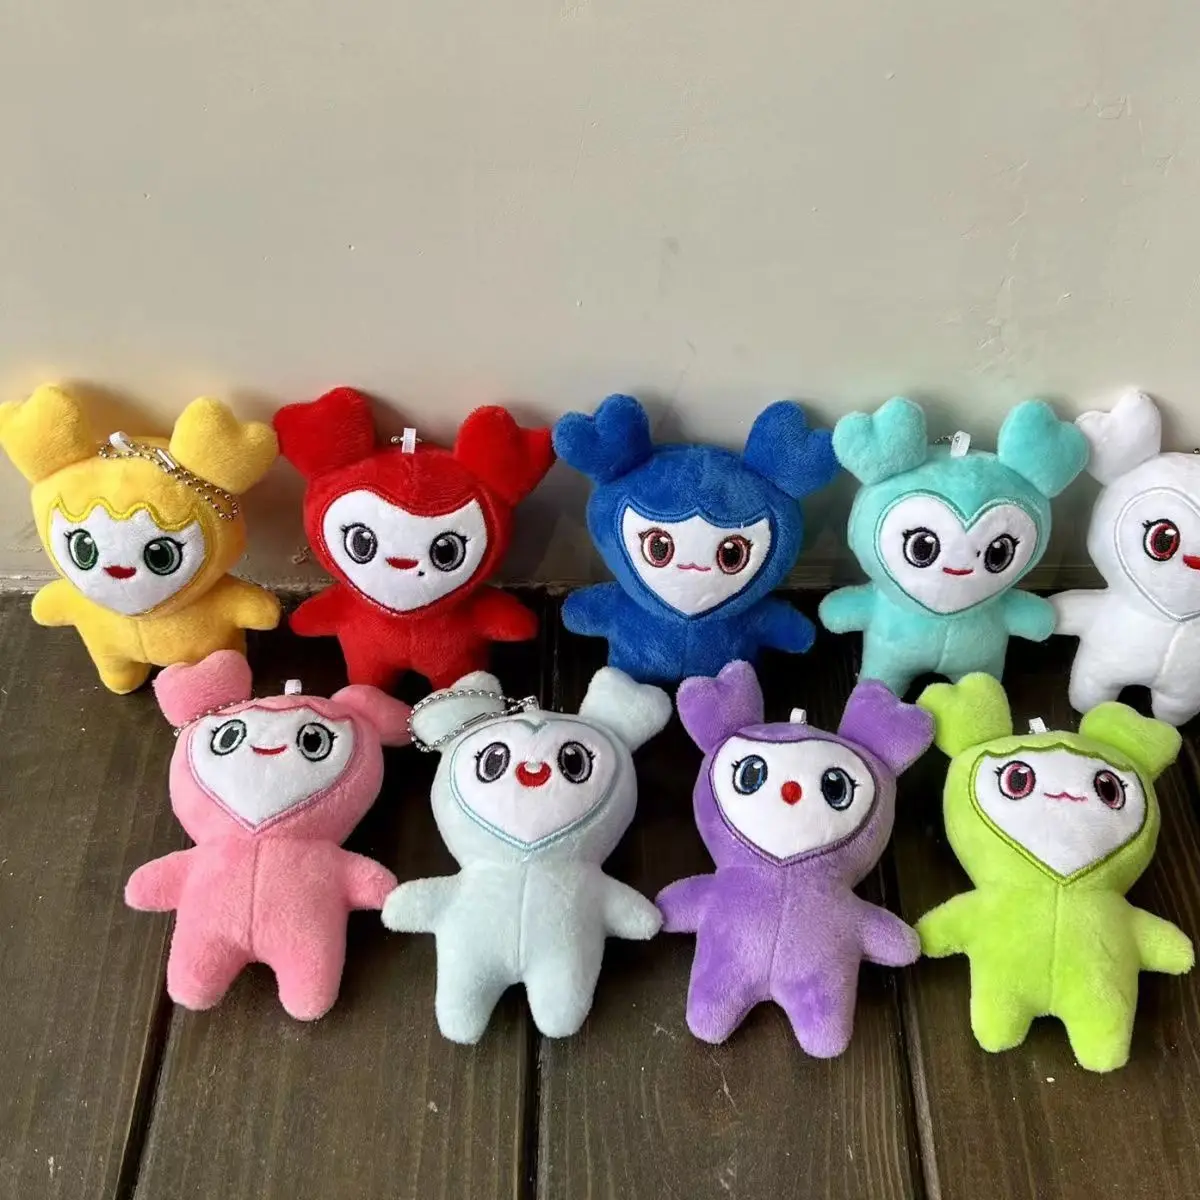 Korean Super Star Plush Toy Keychain Pendant Cartoon Character Twice Momo  Lovely Doll Keybuckle Stuffed Toys For Fans Once Girls - AliExpress